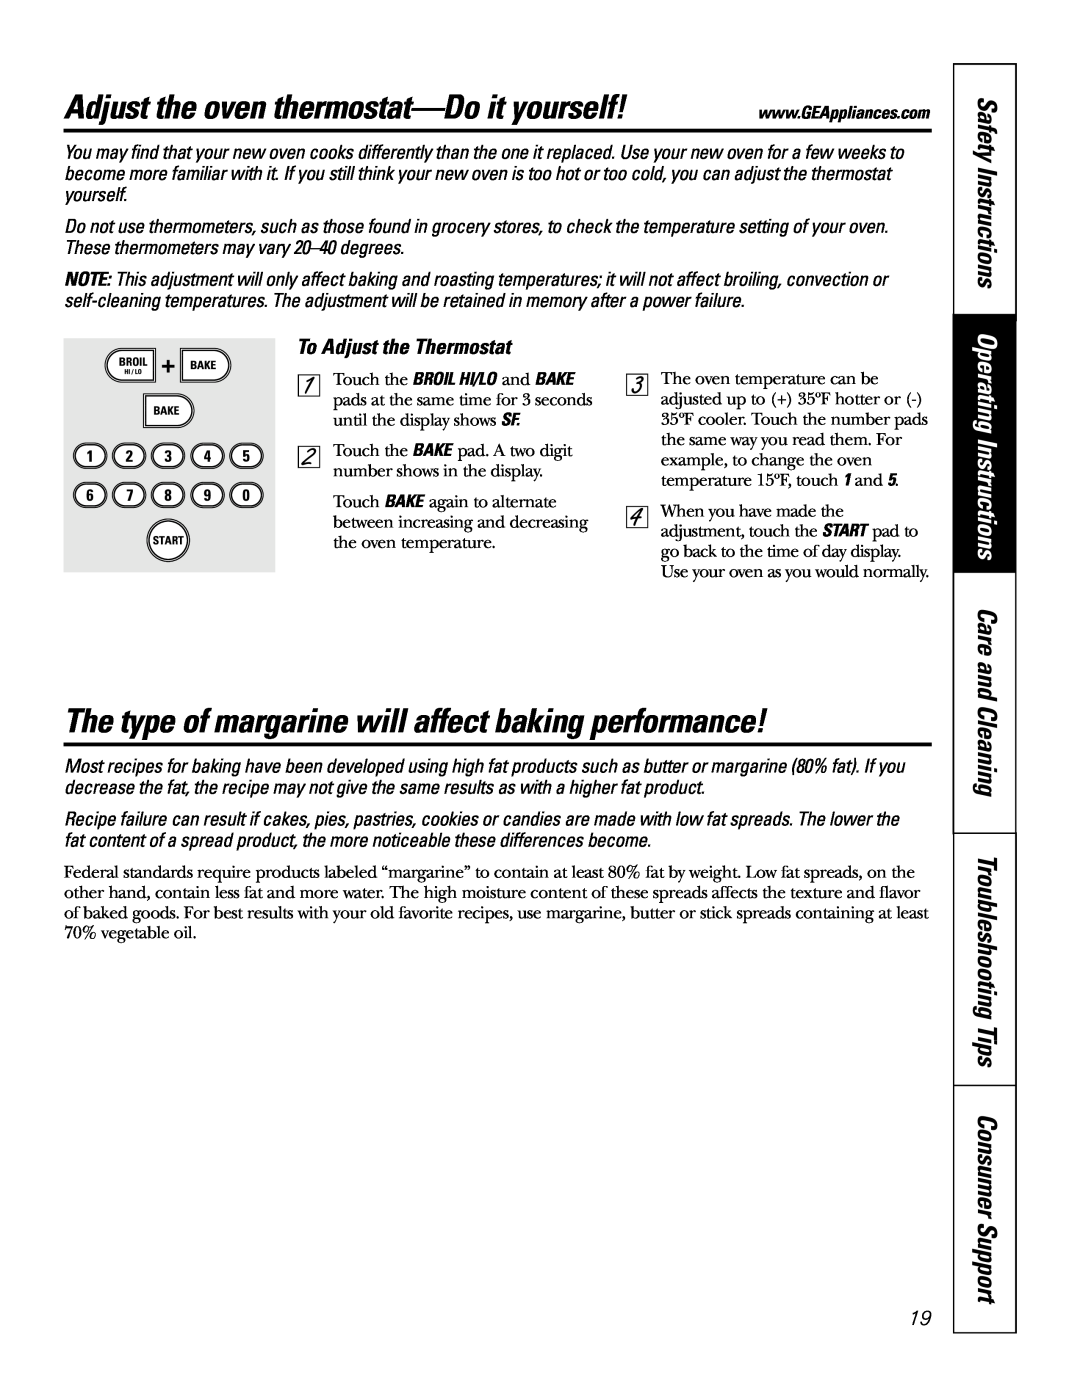 GE JB905 owner manual Adjust the oven thermostat-Do it yourself, The type of margarine will affect baking performance 